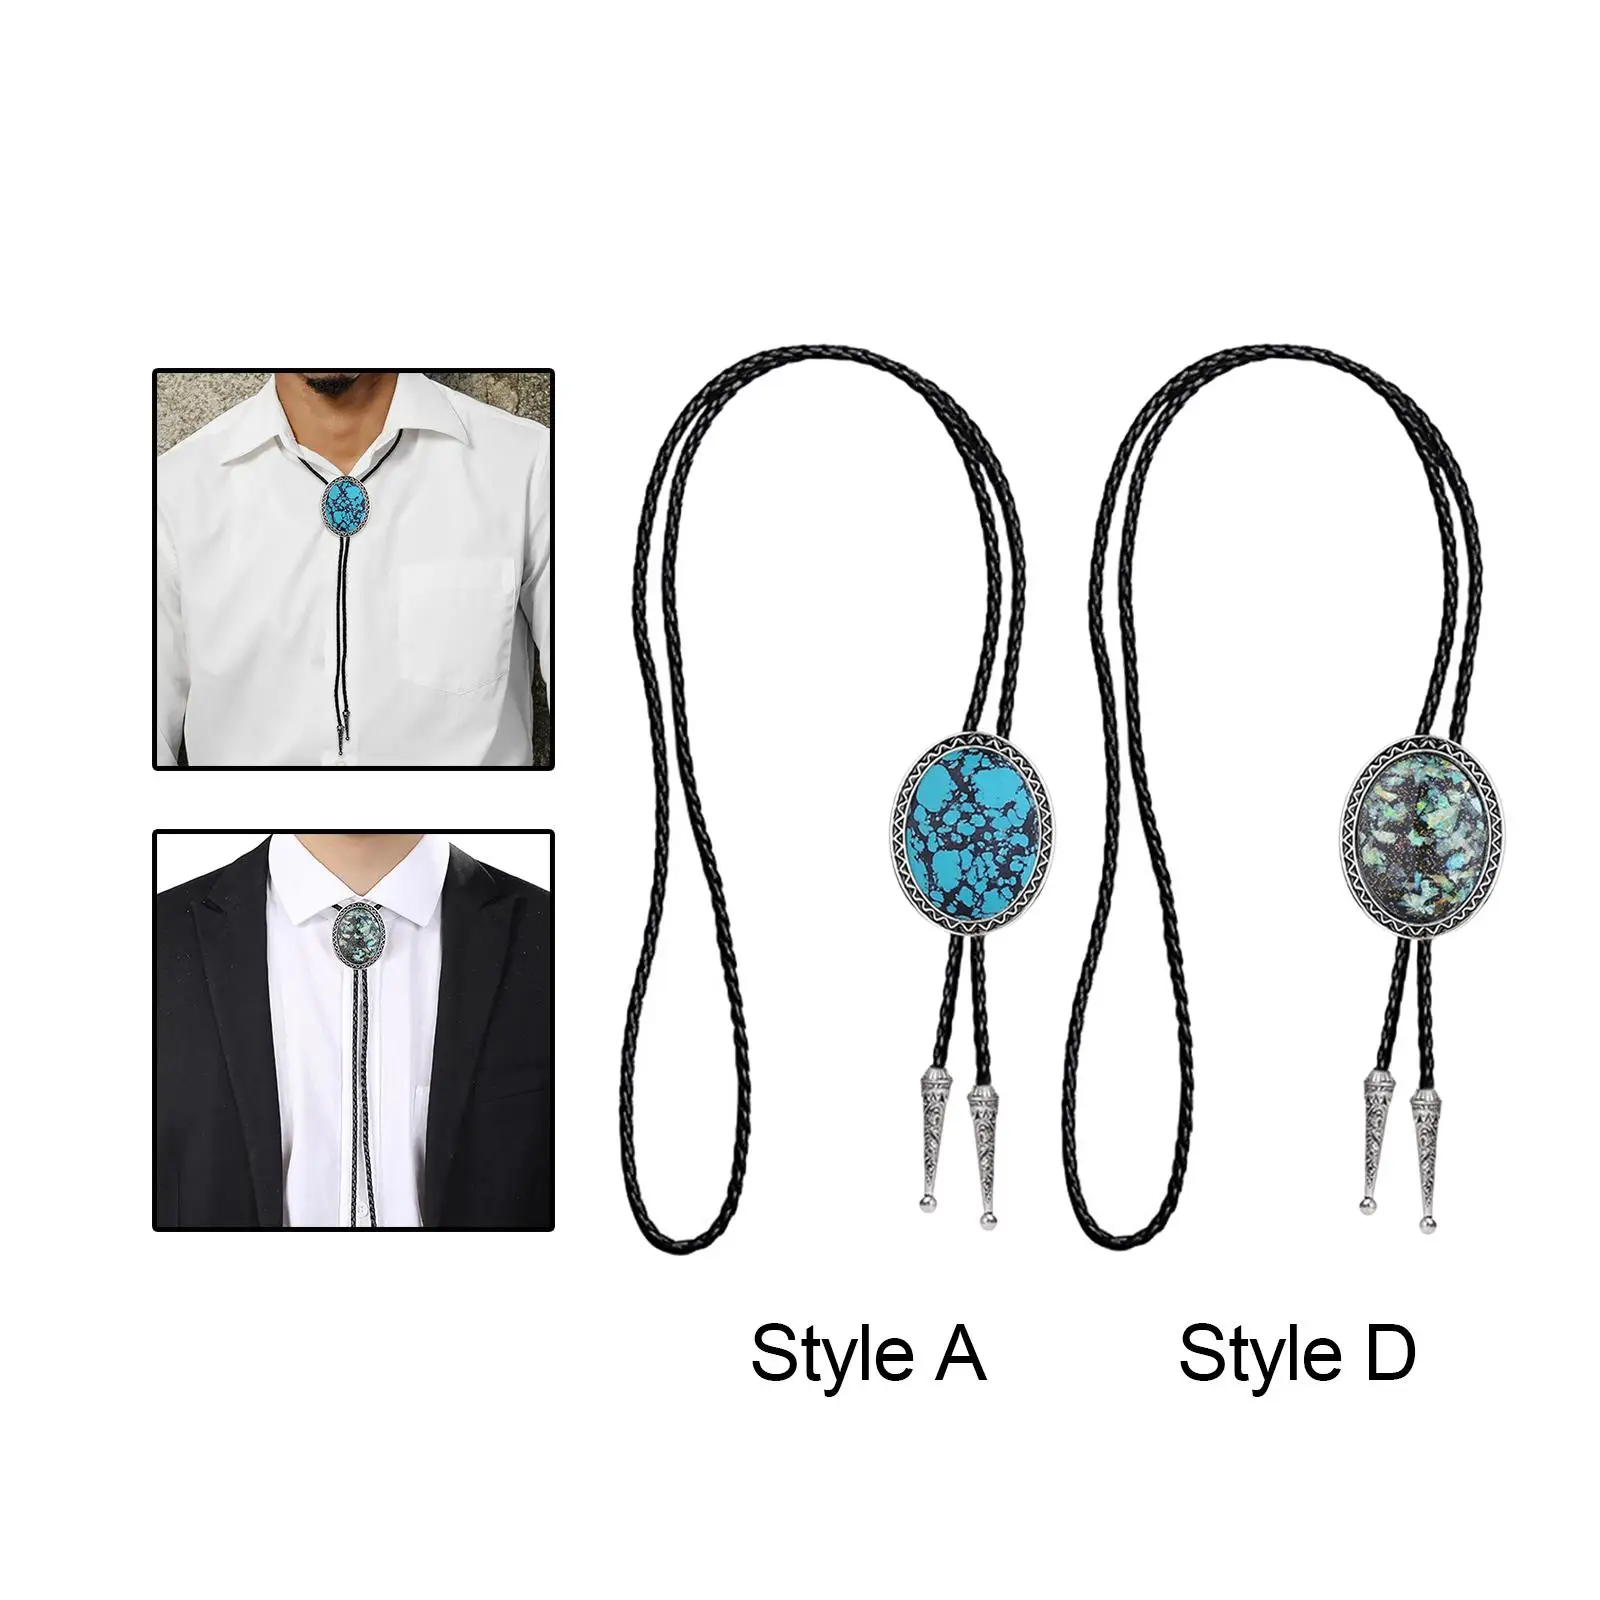 Alloy Mens Bolo Tie Oval PU Leather Braided Leather Lanyard Rope Necktie Neck Rope for Shirt Jazz Hat Women Holidays Graduation